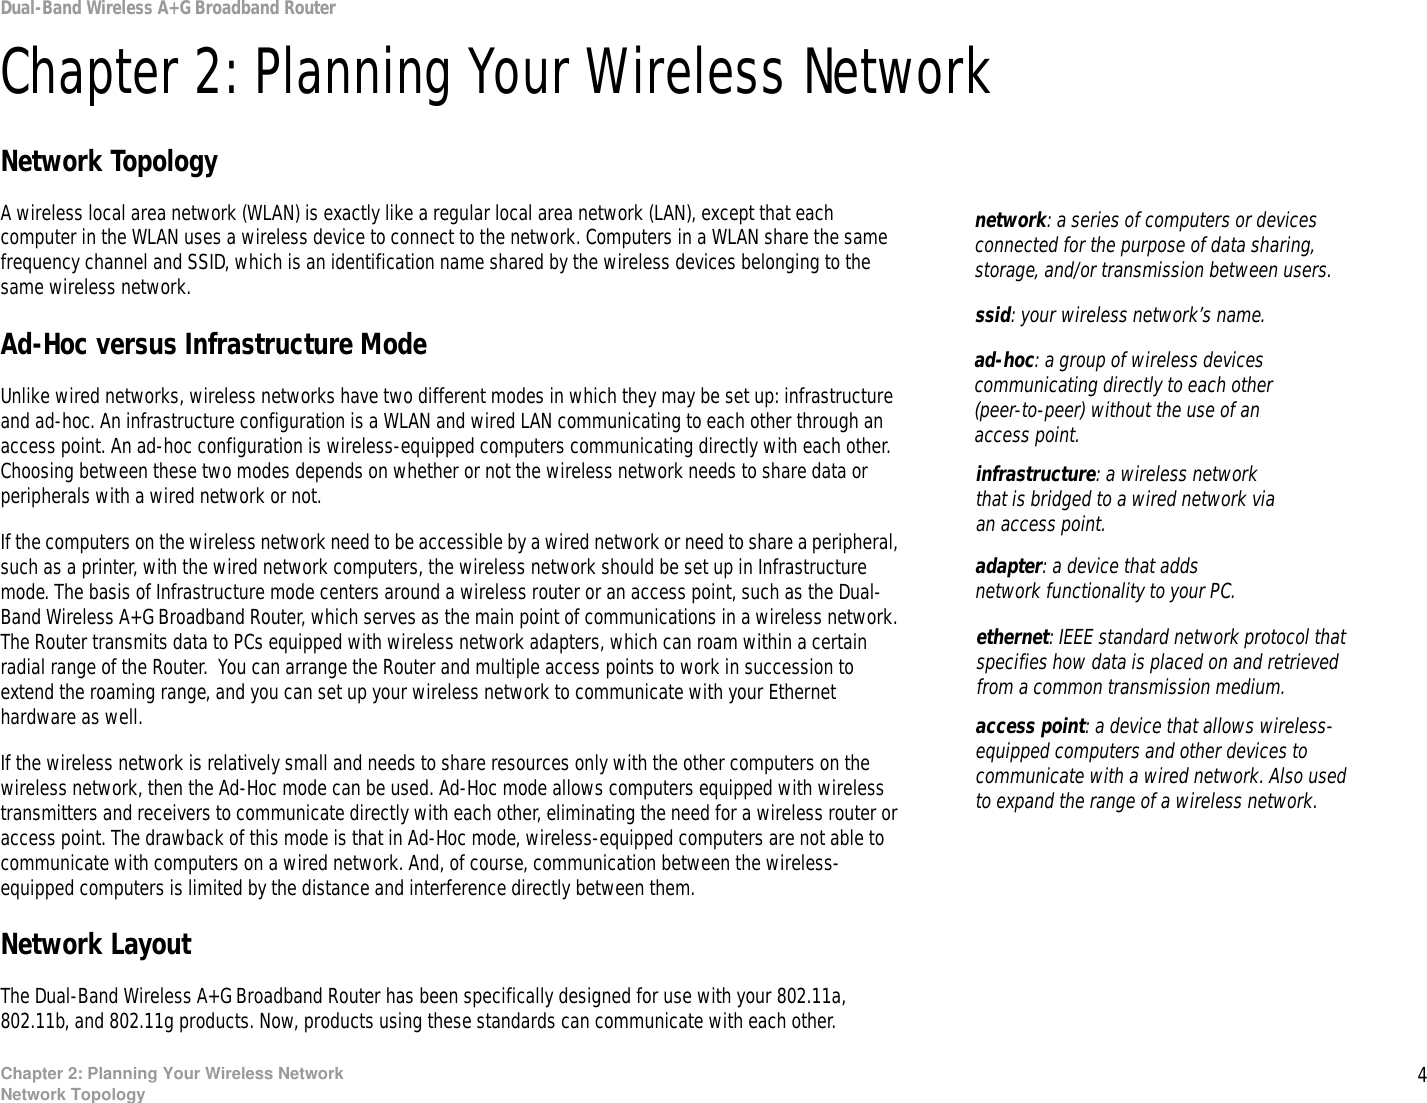 4Chapter 2: Planning Your Wireless NetworkNetwork TopologyDual-Band Wireless A+G Broadband RouterChapter 2: Planning Your Wireless NetworkNetwork TopologyA wireless local area network (WLAN) is exactly like a regular local area network (LAN), except that each computer in the WLAN uses a wireless device to connect to the network. Computers in a WLAN share the same frequency channel and SSID, which is an identification name shared by the wireless devices belonging to the same wireless network.Ad-Hoc versus Infrastructure ModeUnlike wired networks, wireless networks have two different modes in which they may be set up: infrastructure and ad-hoc. An infrastructure configuration is a WLAN and wired LAN communicating to each other through an access point. An ad-hoc configuration is wireless-equipped computers communicating directly with each other. Choosing between these two modes depends on whether or not the wireless network needs to share data or peripherals with a wired network or not. If the computers on the wireless network need to be accessible by a wired network or need to share a peripheral, such as a printer, with the wired network computers, the wireless network should be set up in Infrastructure mode. The basis of Infrastructure mode centers around a wireless router or an access point, such as the Dual-Band Wireless A+G Broadband Router, which serves as the main point of communications in a wireless network. The Router transmits data to PCs equipped with wireless network adapters, which can roam within a certain radial range of the Router.  You can arrange the Router and multiple access points to work in succession to extend the roaming range, and you can set up your wireless network to communicate with your Ethernet hardware as well. If the wireless network is relatively small and needs to share resources only with the other computers on the wireless network, then the Ad-Hoc mode can be used. Ad-Hoc mode allows computers equipped with wireless transmitters and receivers to communicate directly with each other, eliminating the need for a wireless router or access point. The drawback of this mode is that in Ad-Hoc mode, wireless-equipped computers are not able to communicate with computers on a wired network. And, of course, communication between the wireless-equipped computers is limited by the distance and interference directly between them. Network LayoutThe Dual-Band Wireless A+G Broadband Router has been specifically designed for use with your 802.11a, 802.11b, and 802.11g products. Now, products using these standards can communicate with each other.infrastructure: a wireless network that is bridged to a wired network via an access point.ssid: your wireless network’s name.ad-hoc: a group of wireless devices communicating directly to each other (peer-to-peer) without the use of an access point.access point: a device that allows wireless-equipped computers and other devices to communicate with a wired network. Also used to expand the range of a wireless network.adapter: a device that adds network functionality to your PC.ethernet: IEEE standard network protocol that specifies how data is placed on and retrieved from a common transmission medium.network: a series of computers or devices connected for the purpose of data sharing, storage, and/or transmission between users.